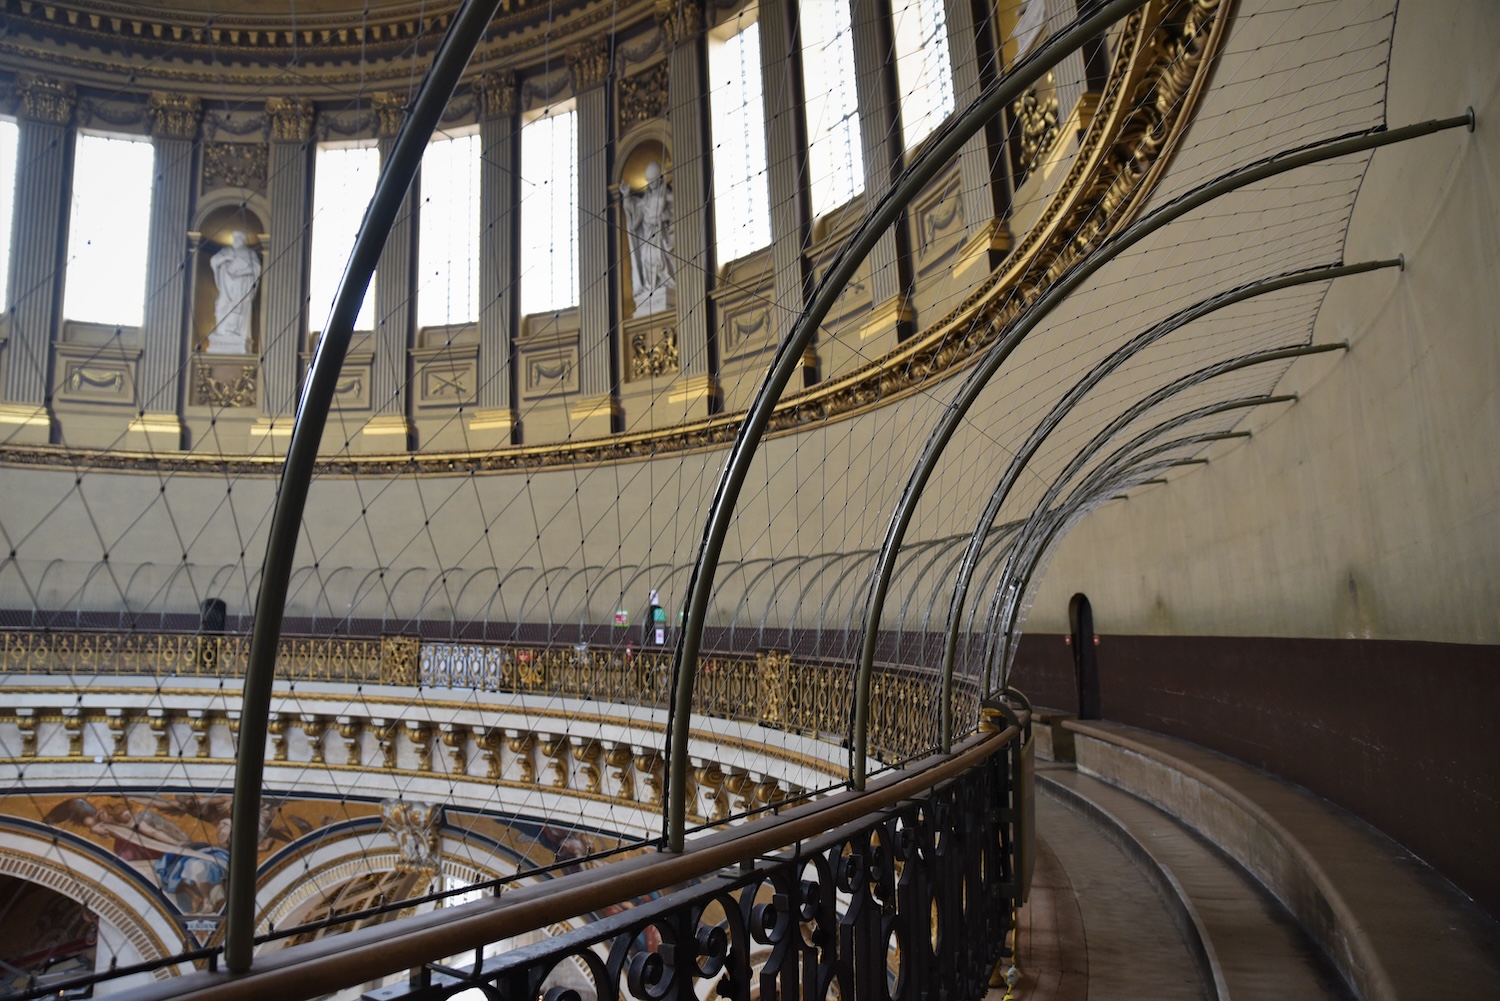 Whispering Gallery at Saint Paul's Cathedral in London. Photo Credit: © St Paul's Cathedral.